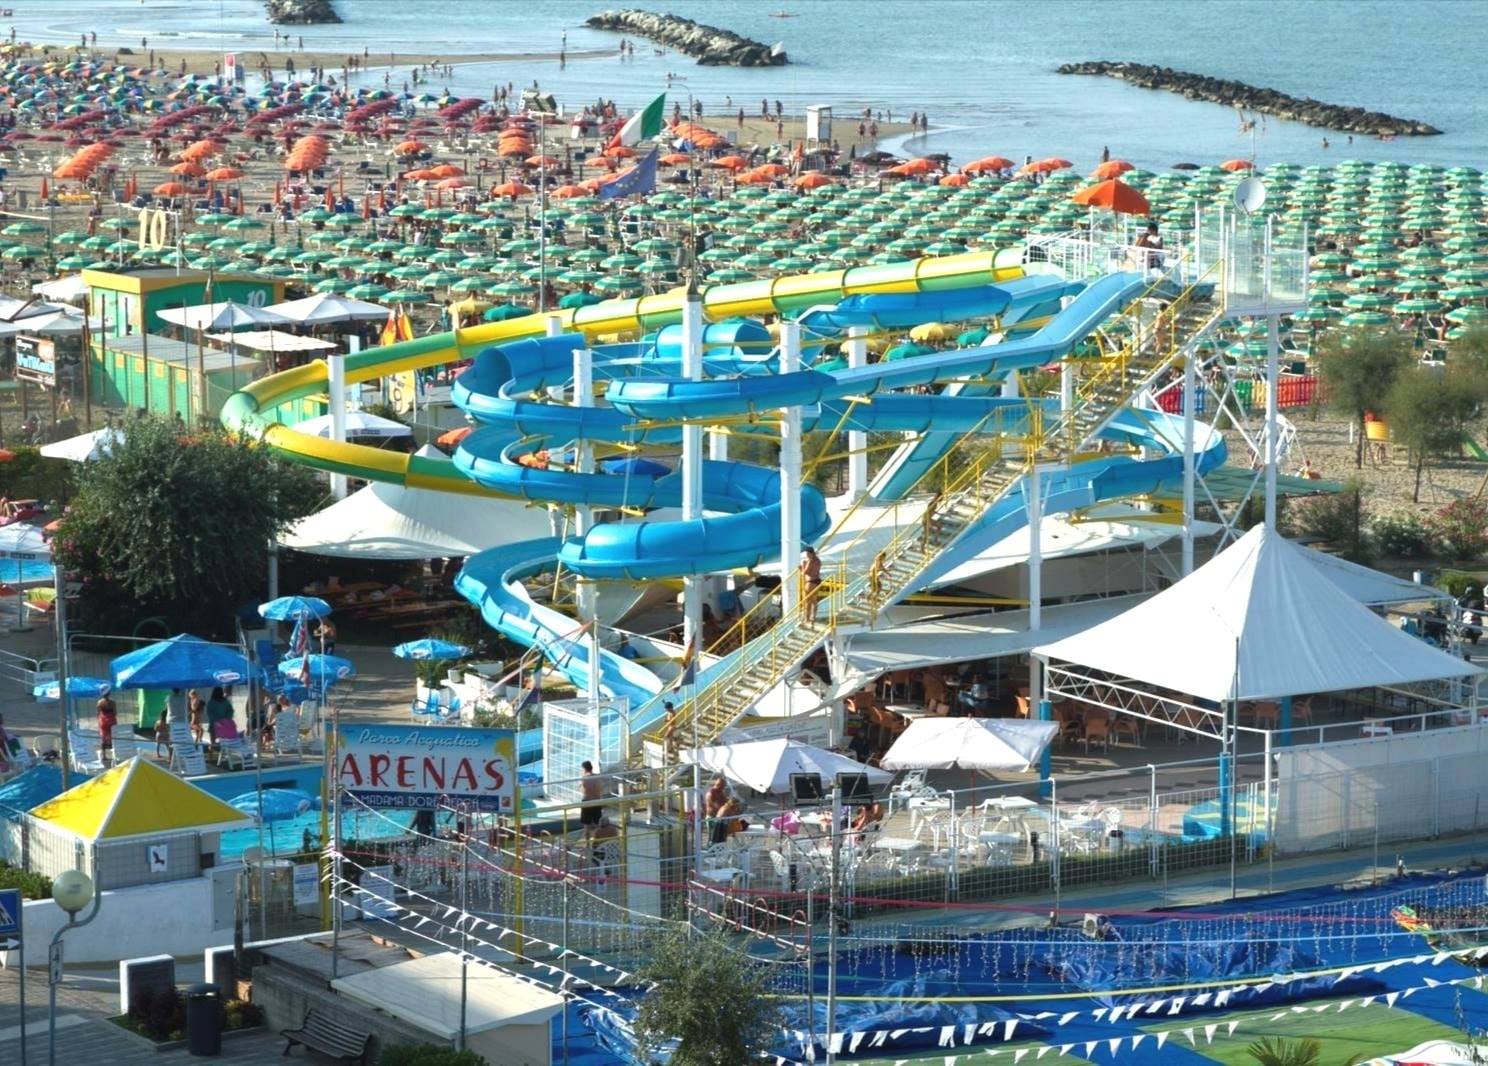 Water slides on the beach